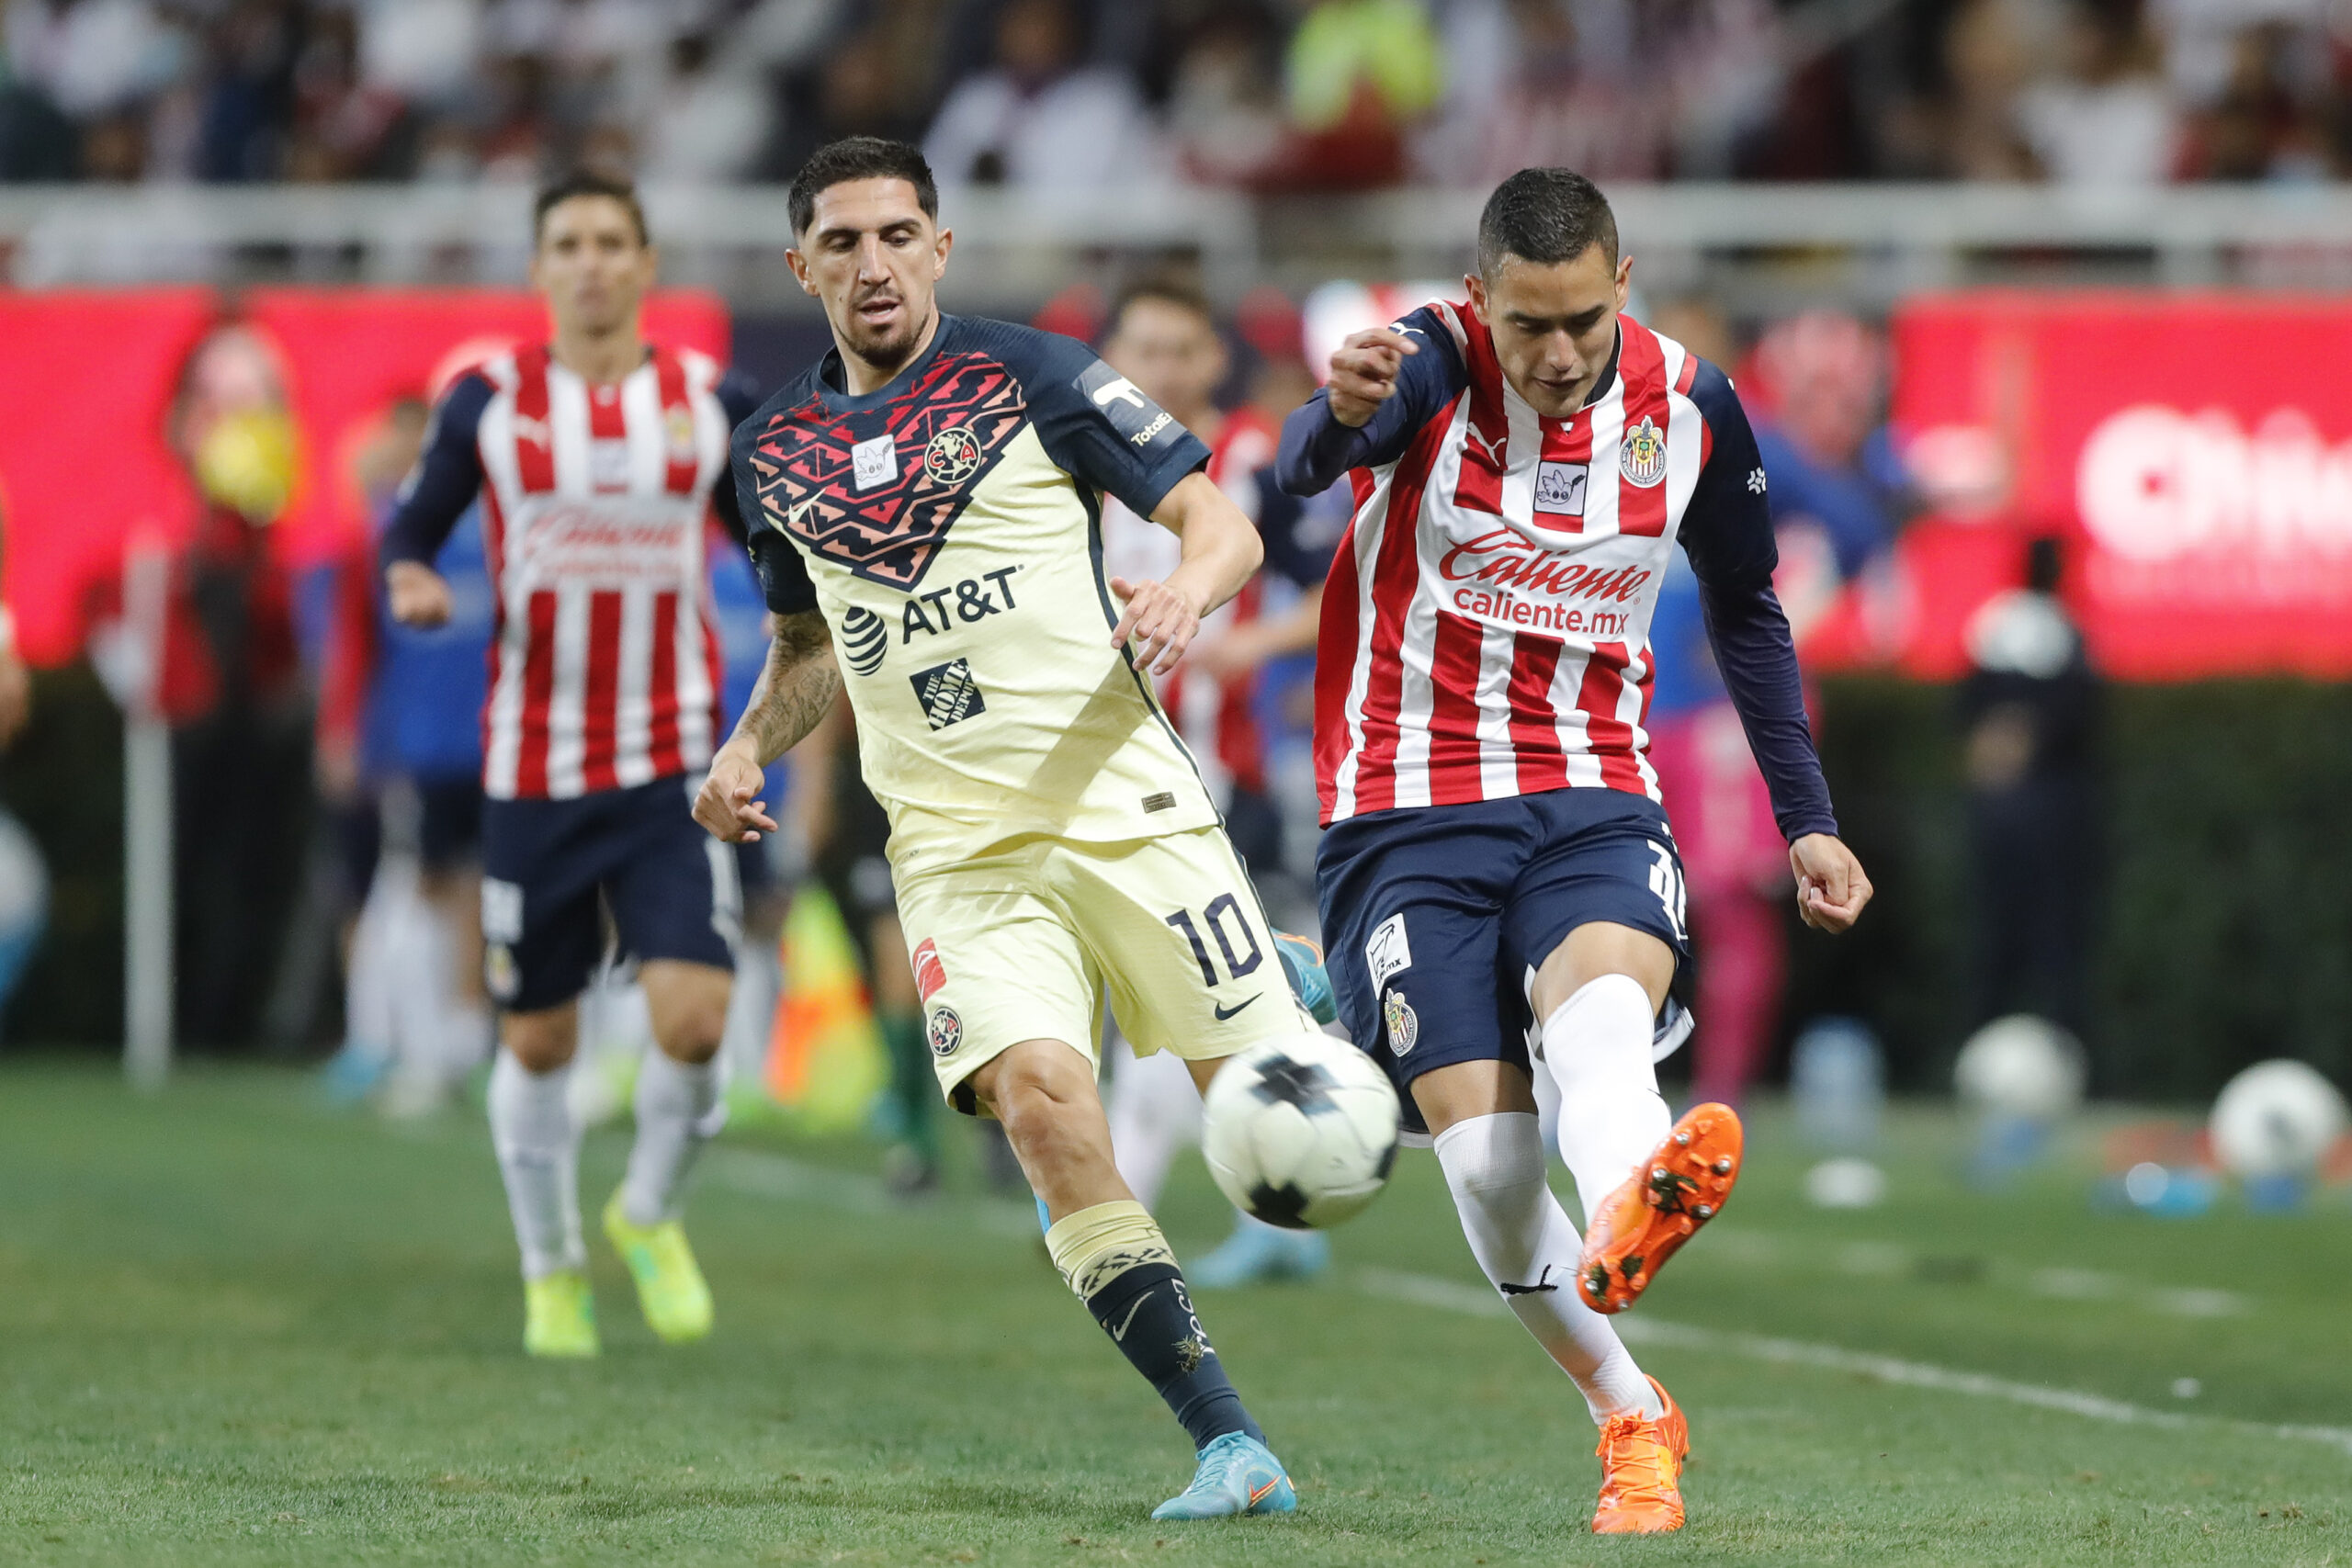 ZAPOPAN, MEXICO - MARCH 12: Sergio Flores of Chivas fights for the ball with Diego Valdés of America  during the 10th round match between Chivas and America as part of the Torneo Grita Mexico C22 Liga MX at Akron Stadium on March 12, 2022 in Zapopan, Mexico. (Photo by Refugio Ruiz/Getty Images)